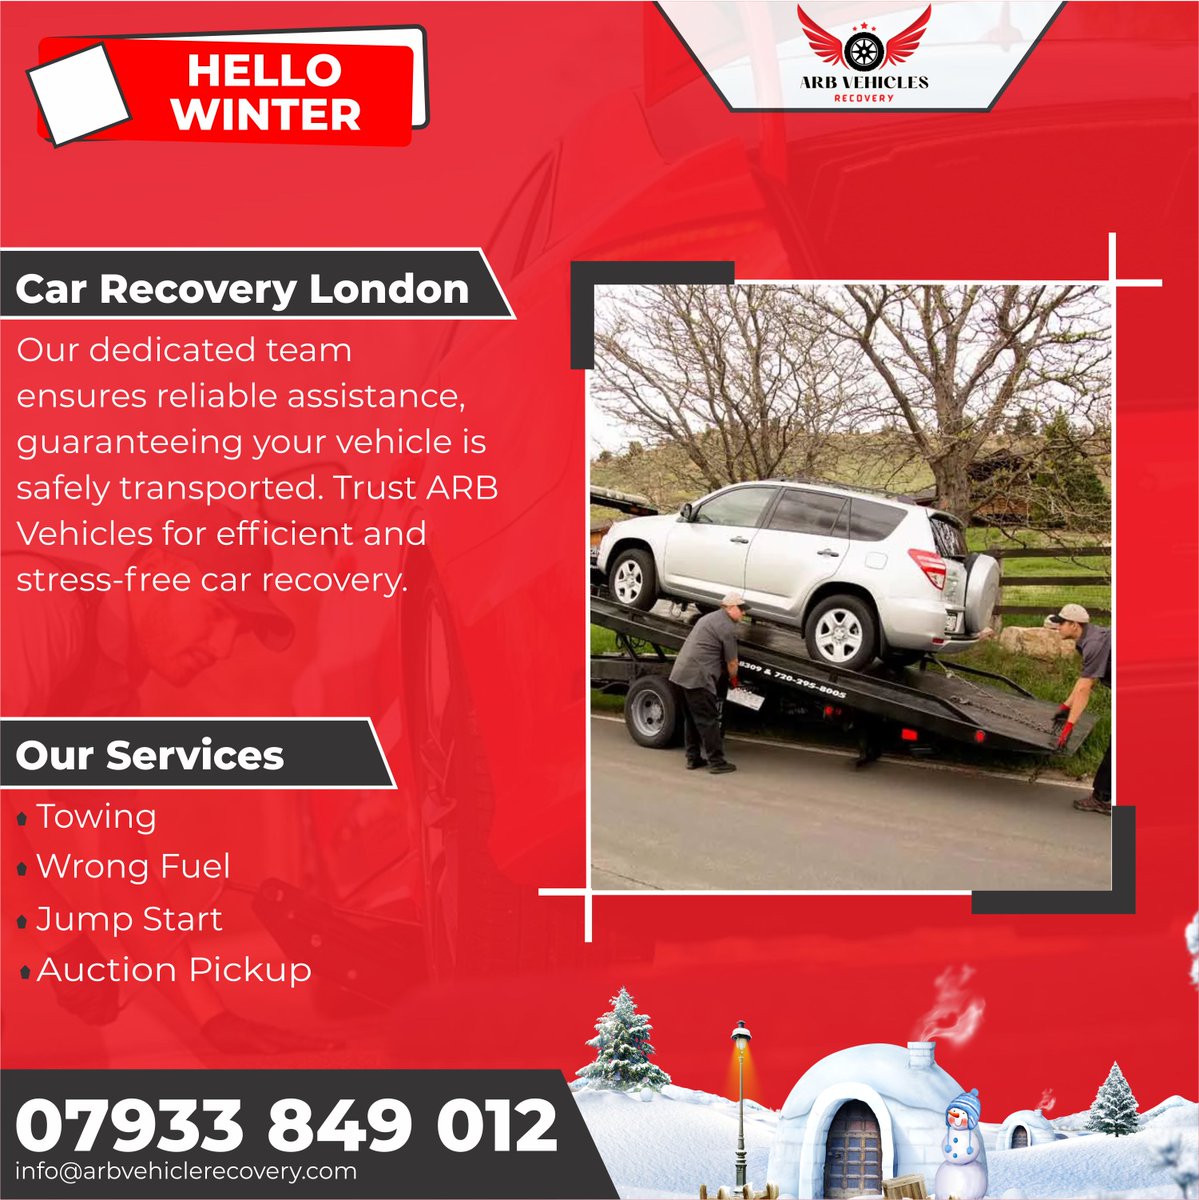 ARB Vehicle Recovery, your go-to for Car Recovery in London. Swift and reliable service, ensuring your peace of mind on Caistor Park Rd and beyond.

arbvehiclerecovery.co.uk
#CarRecoveryLondon
#VehicleRescue
#LondonTowService
#RoadsideAssistance
#EmergencyRecovery